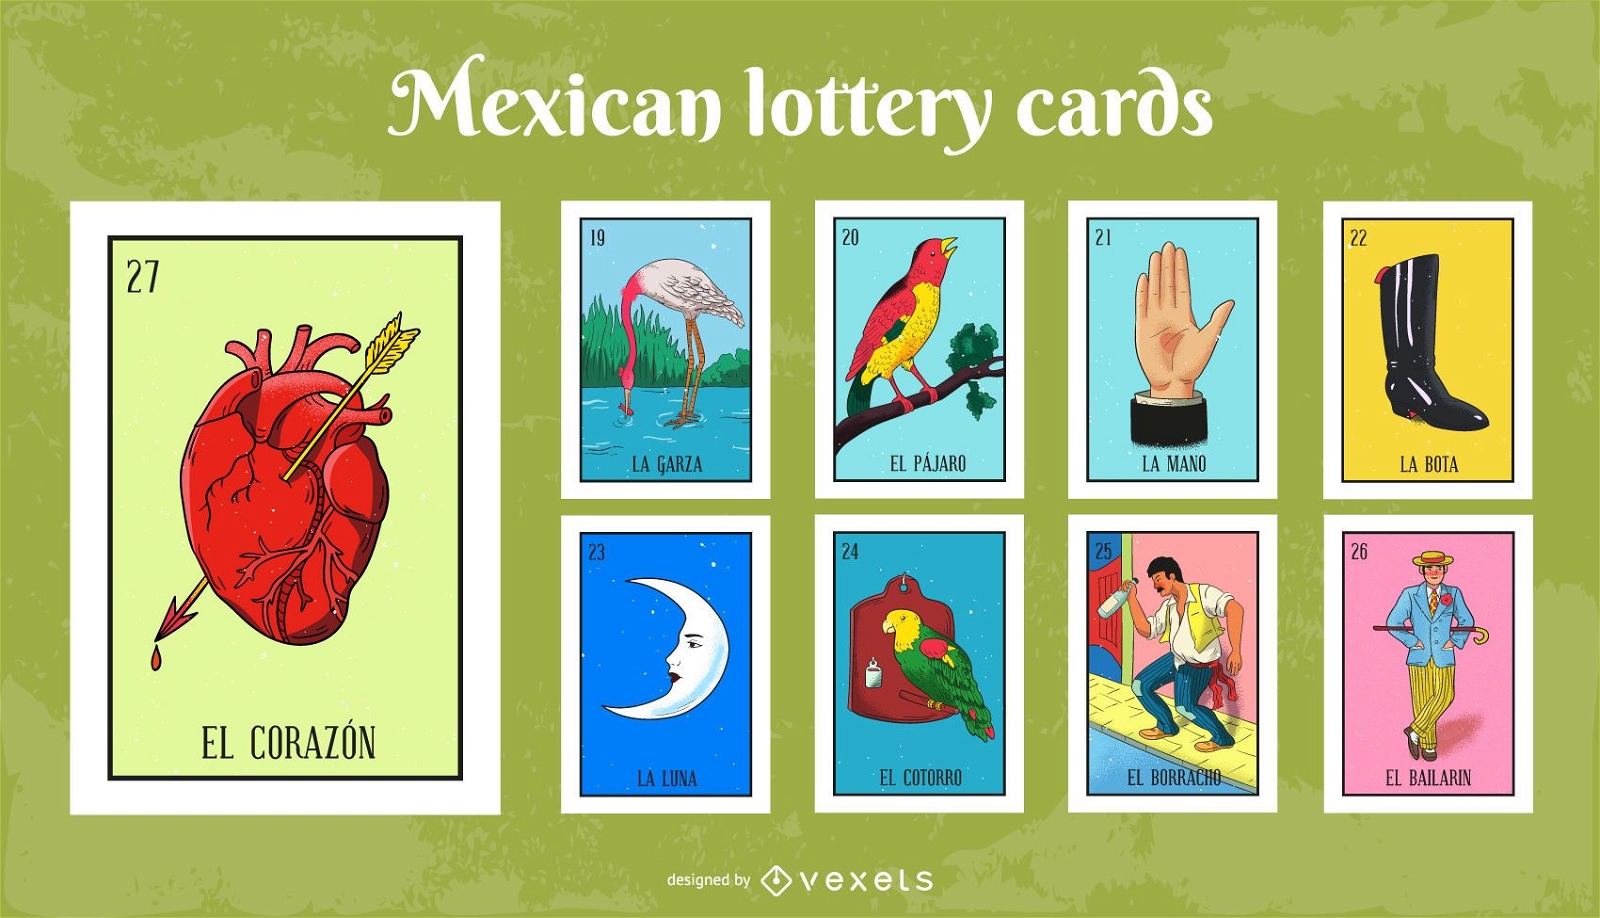 Mexican Lottery Cards Pack #3.